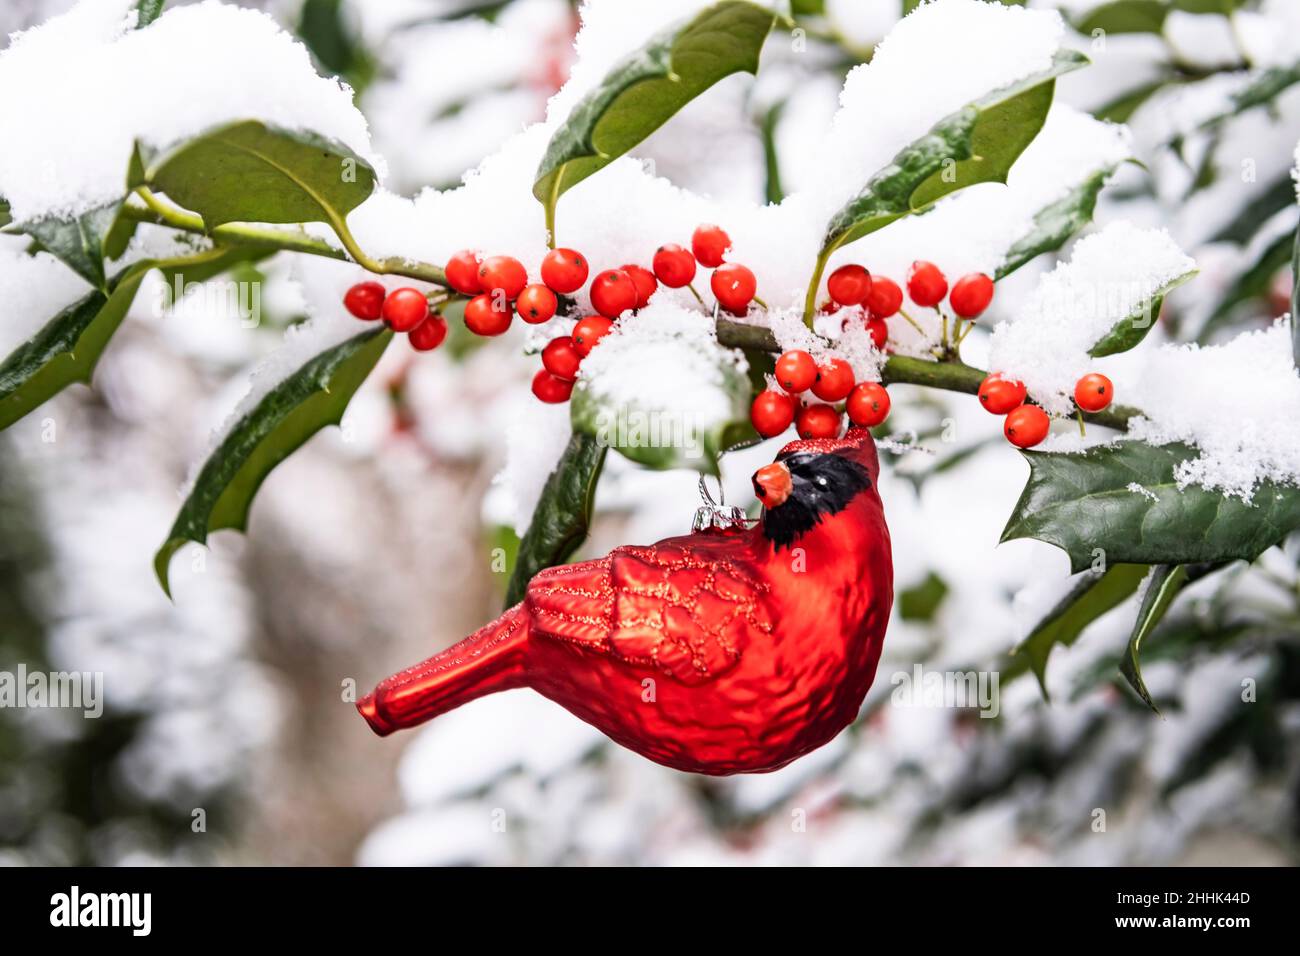 Red cardinal ornament hanging from holly branch with snow and berries Stock Photo